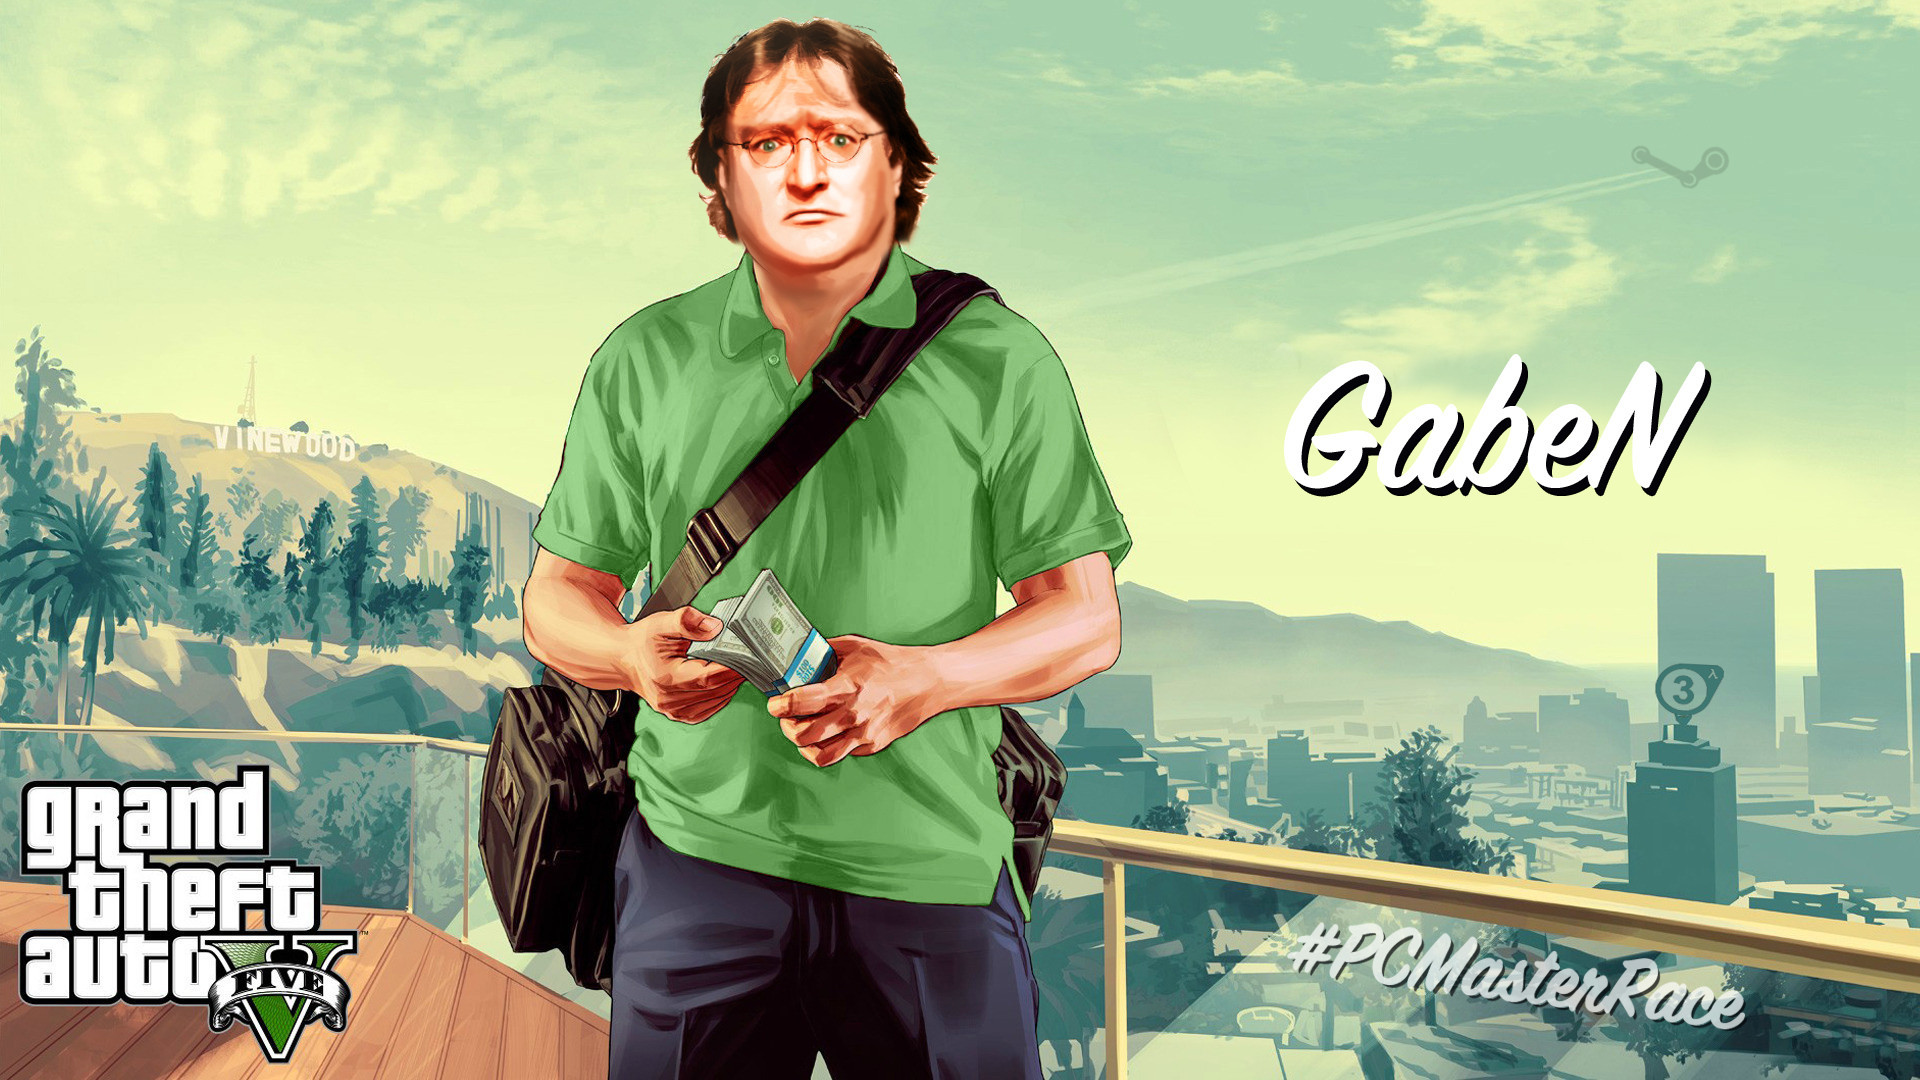 1920x1080 ... Good Wallpapers of Gta V High Resolution All  I Made a  Glorious GabeN GTAWallpaper for All of You! (